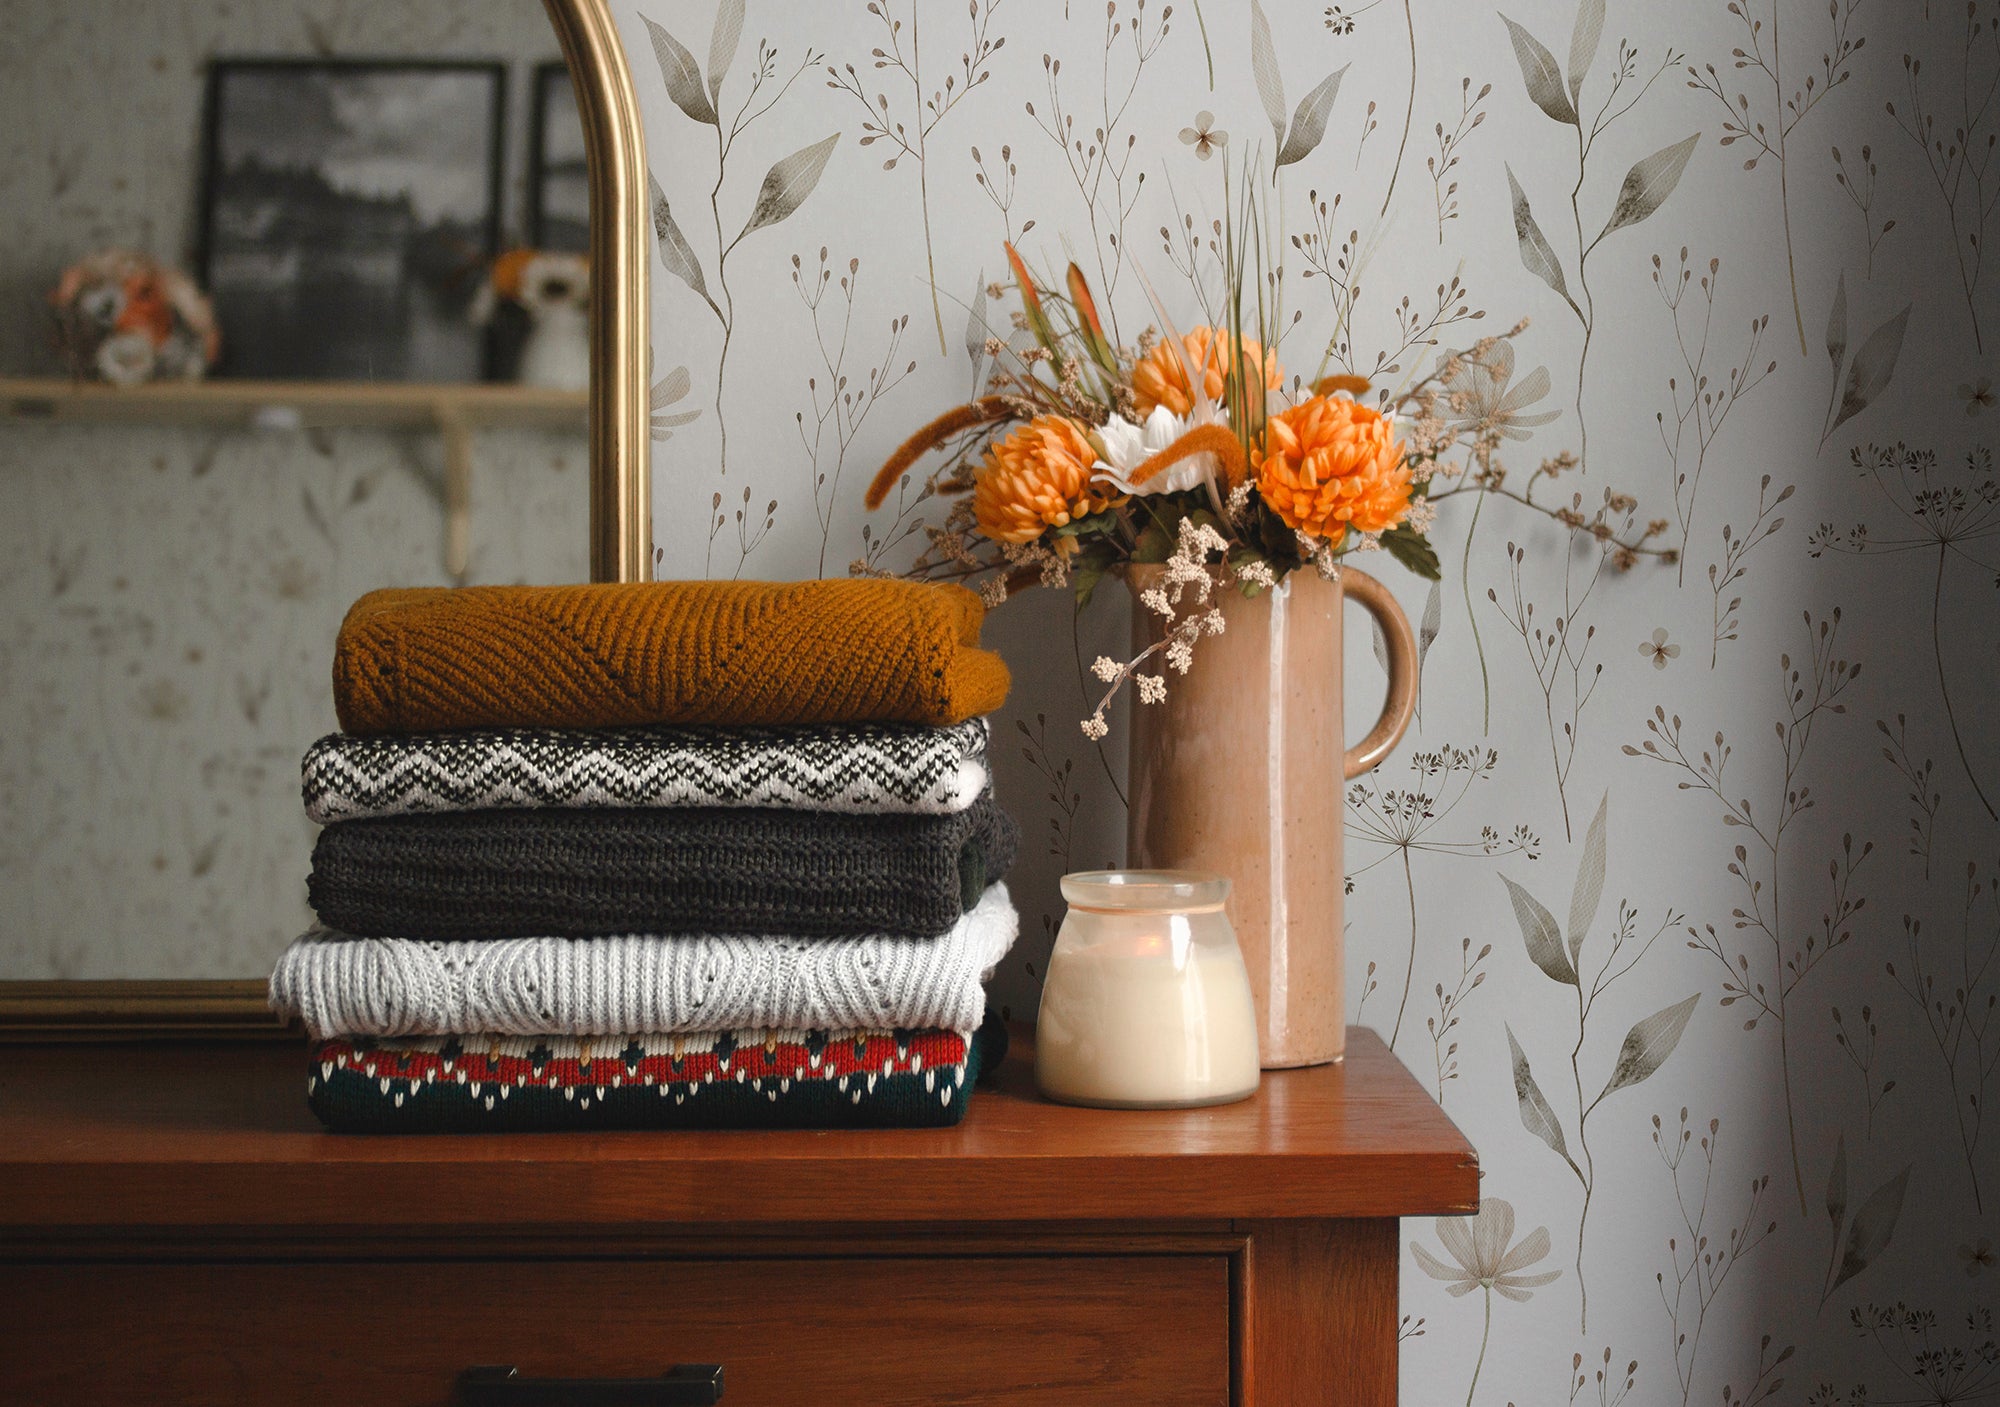 A stylish living space accented with Tranquil Bloom Wallpaper, where the muted floral pattern adds an elegant backdrop to the folded autumnal-colored knitwear and ceramic vase with vibrant flowers.